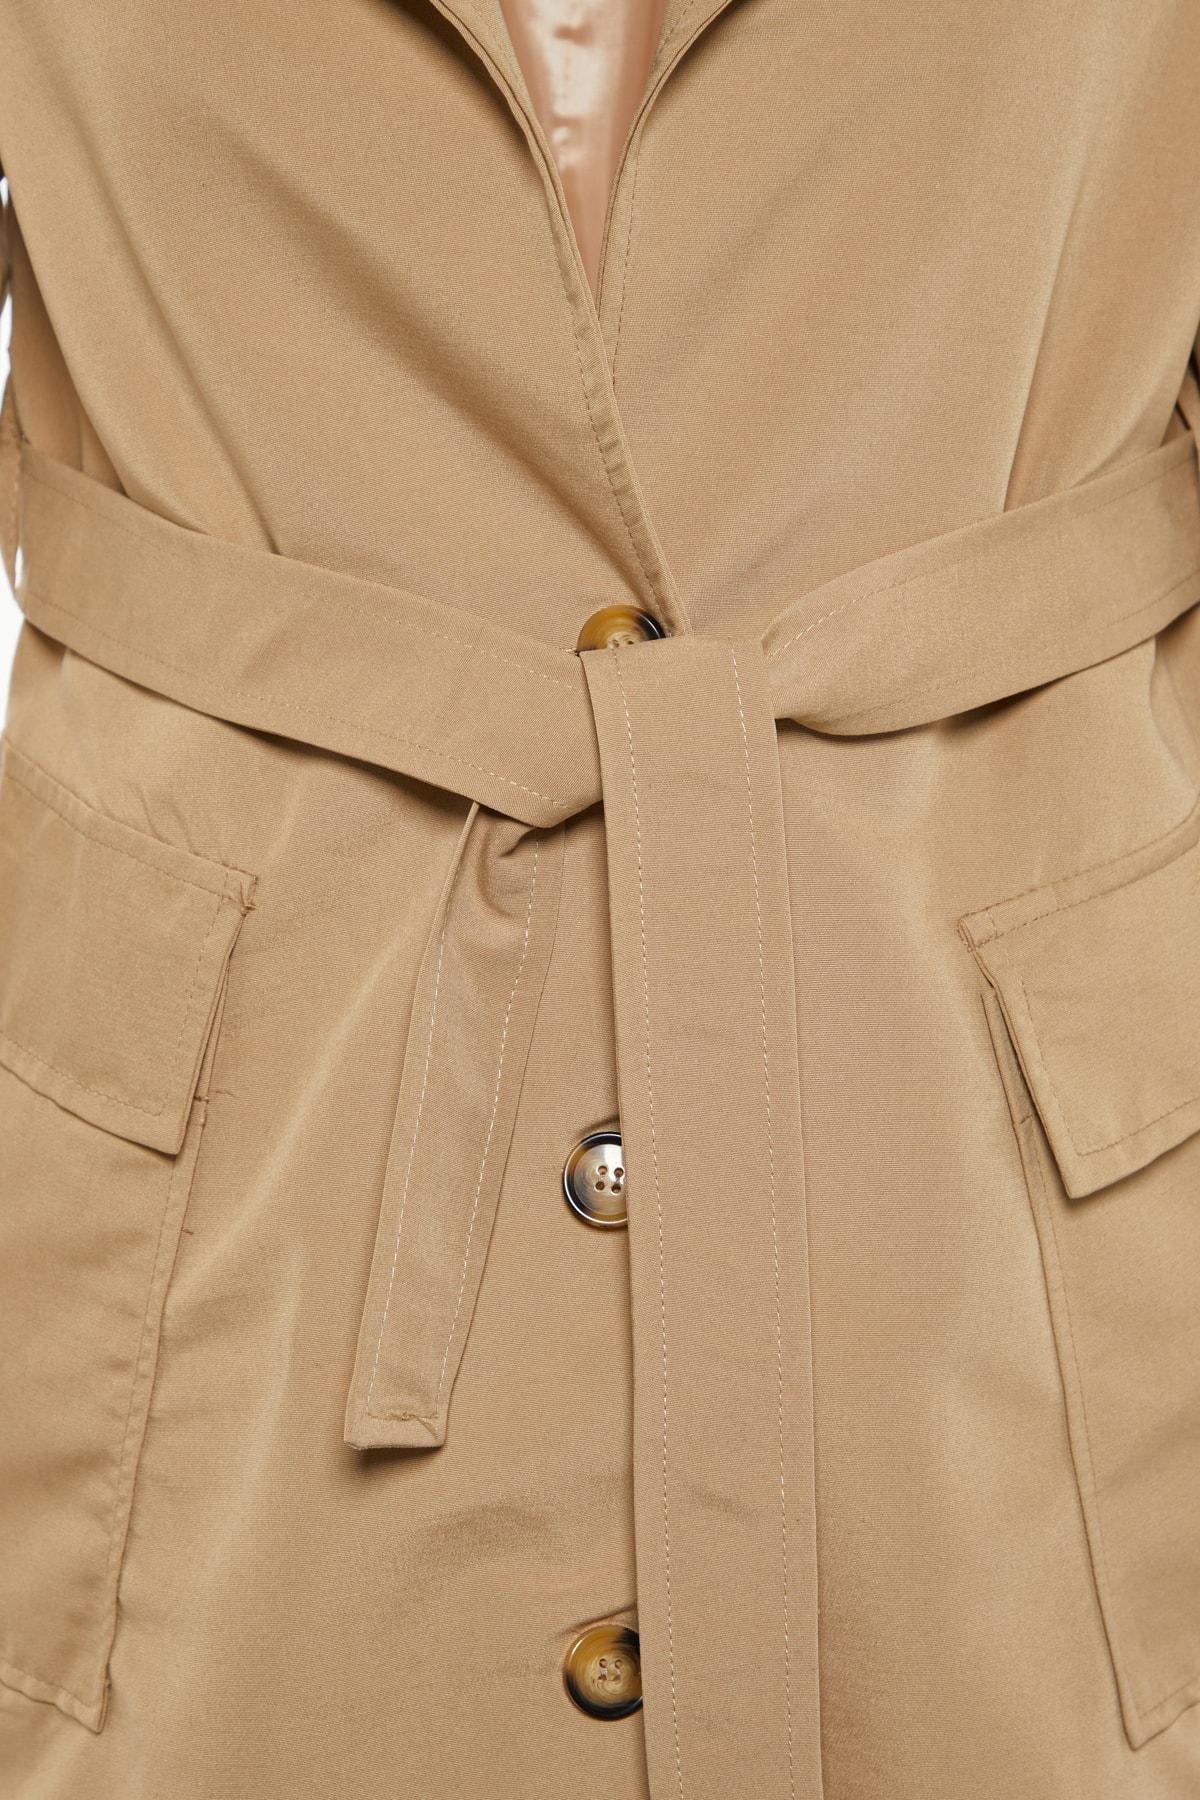 Trendyol - Beige Double Breasted Trench Coat